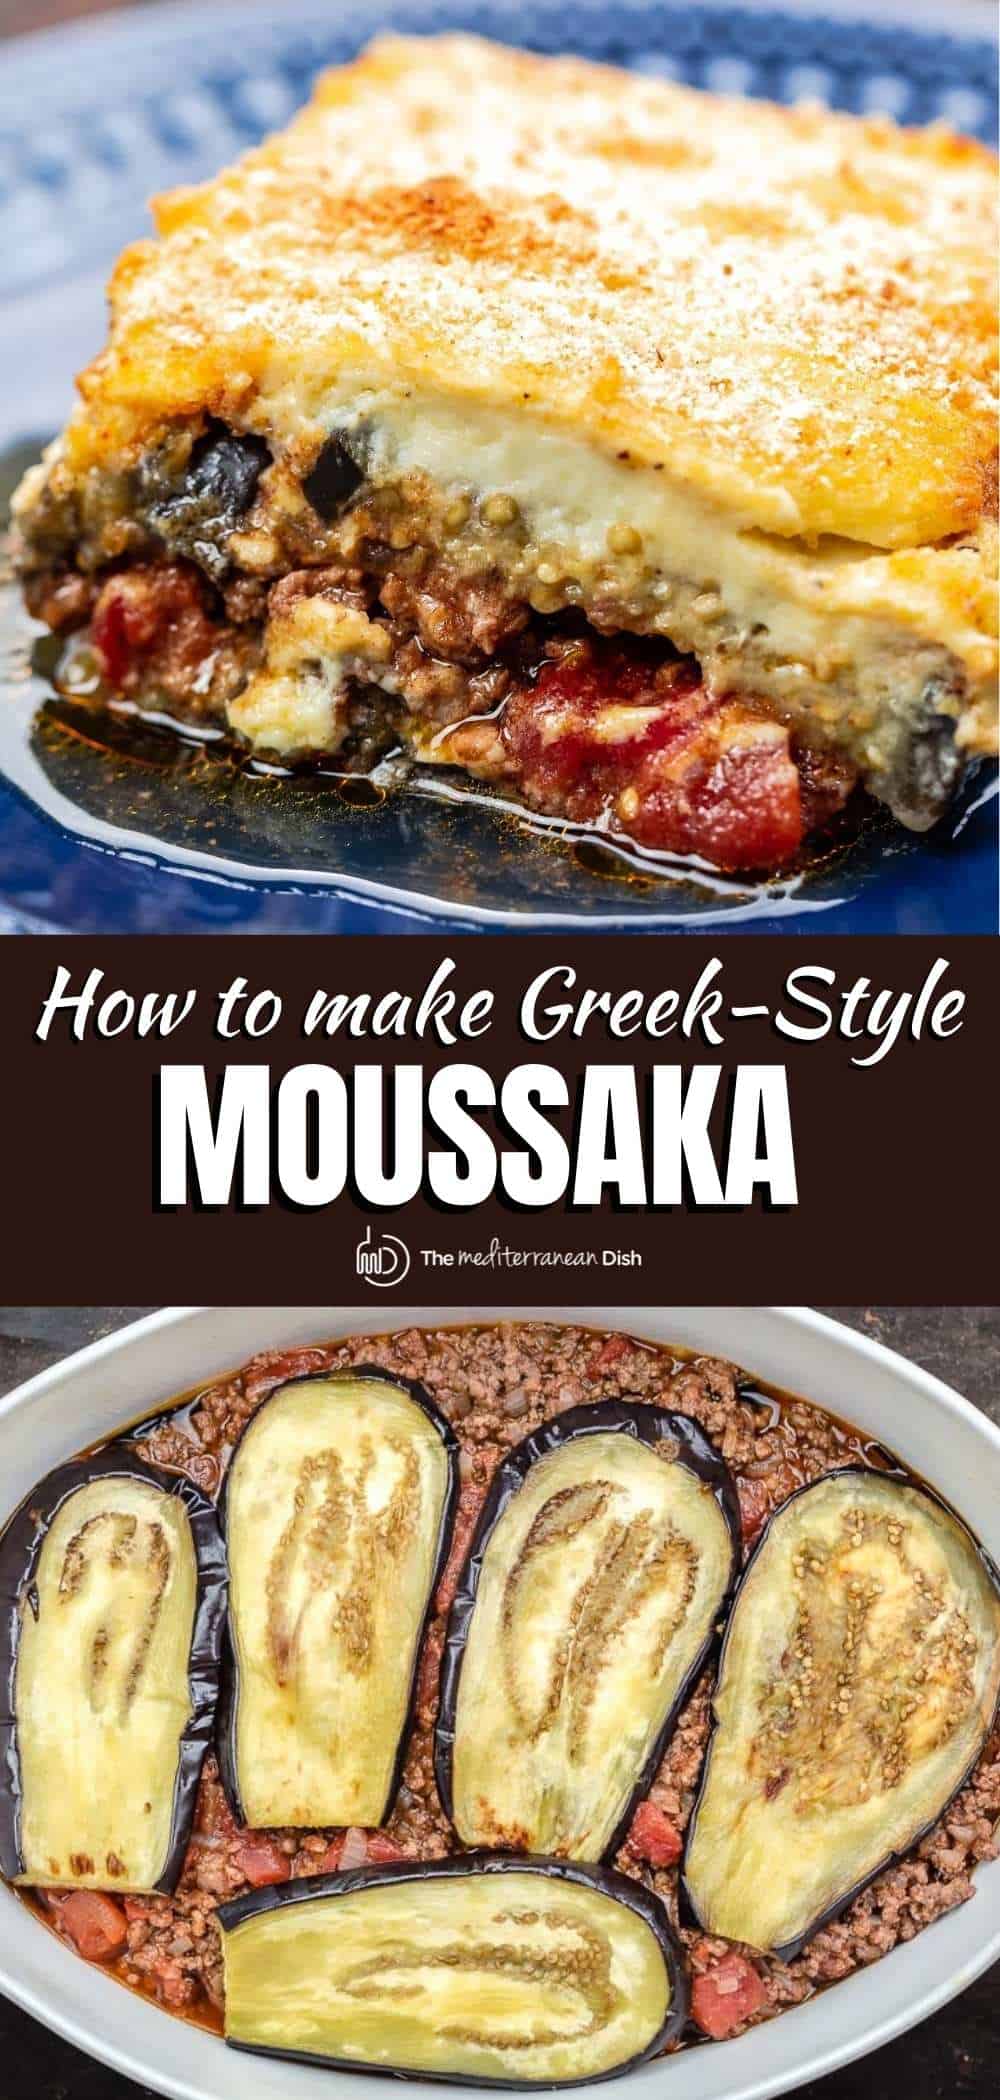 Easy Moussaka Recipe With Eggplant and Potatoes - Tarver Tosible1989